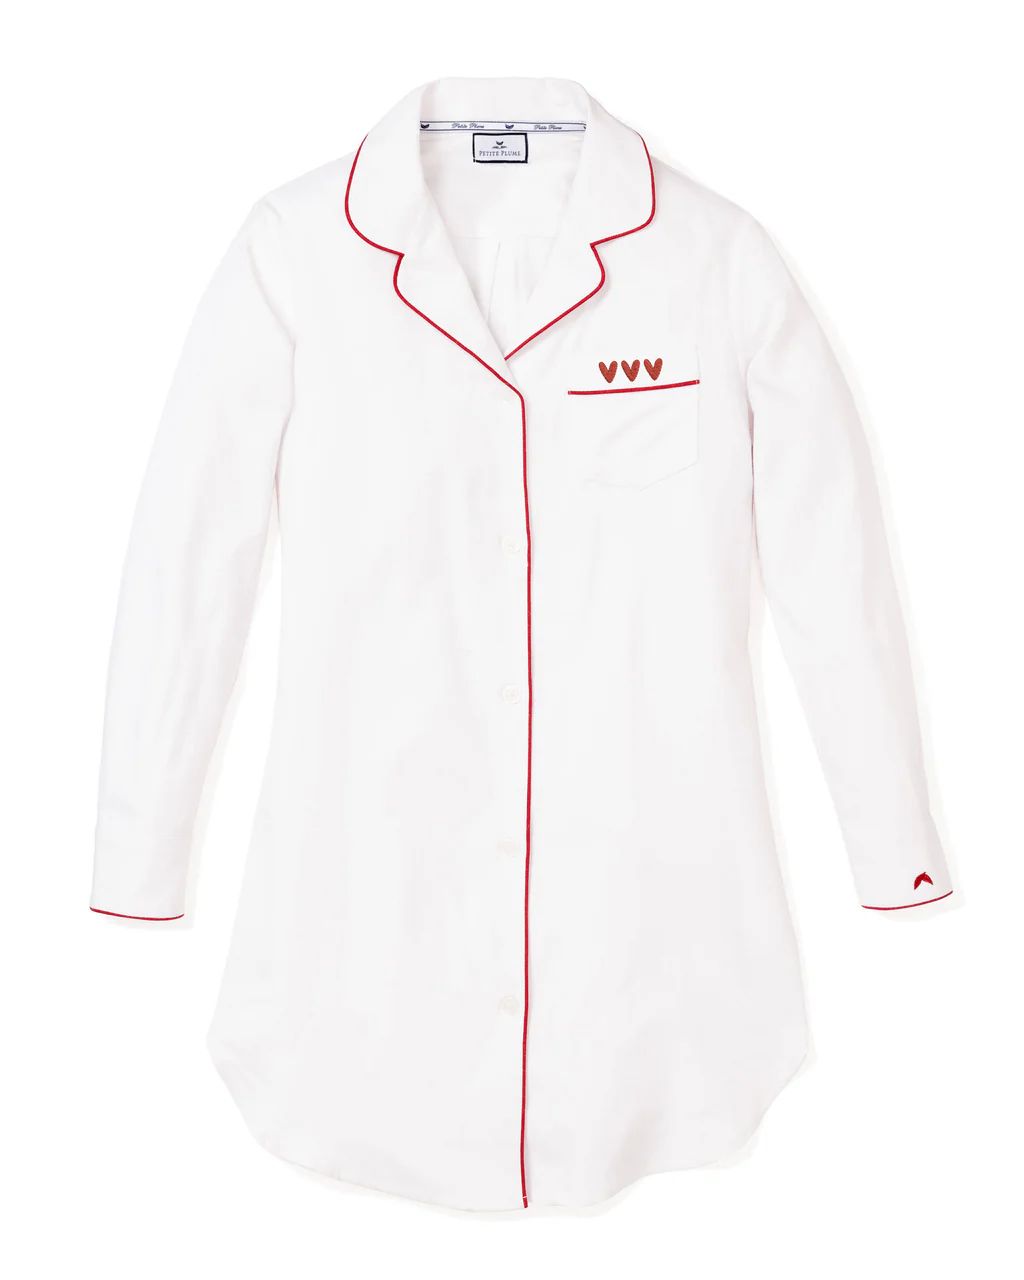 Valentine's Limited Edition - Women's Nightshirt with Heart Embroidery | Petite Plume